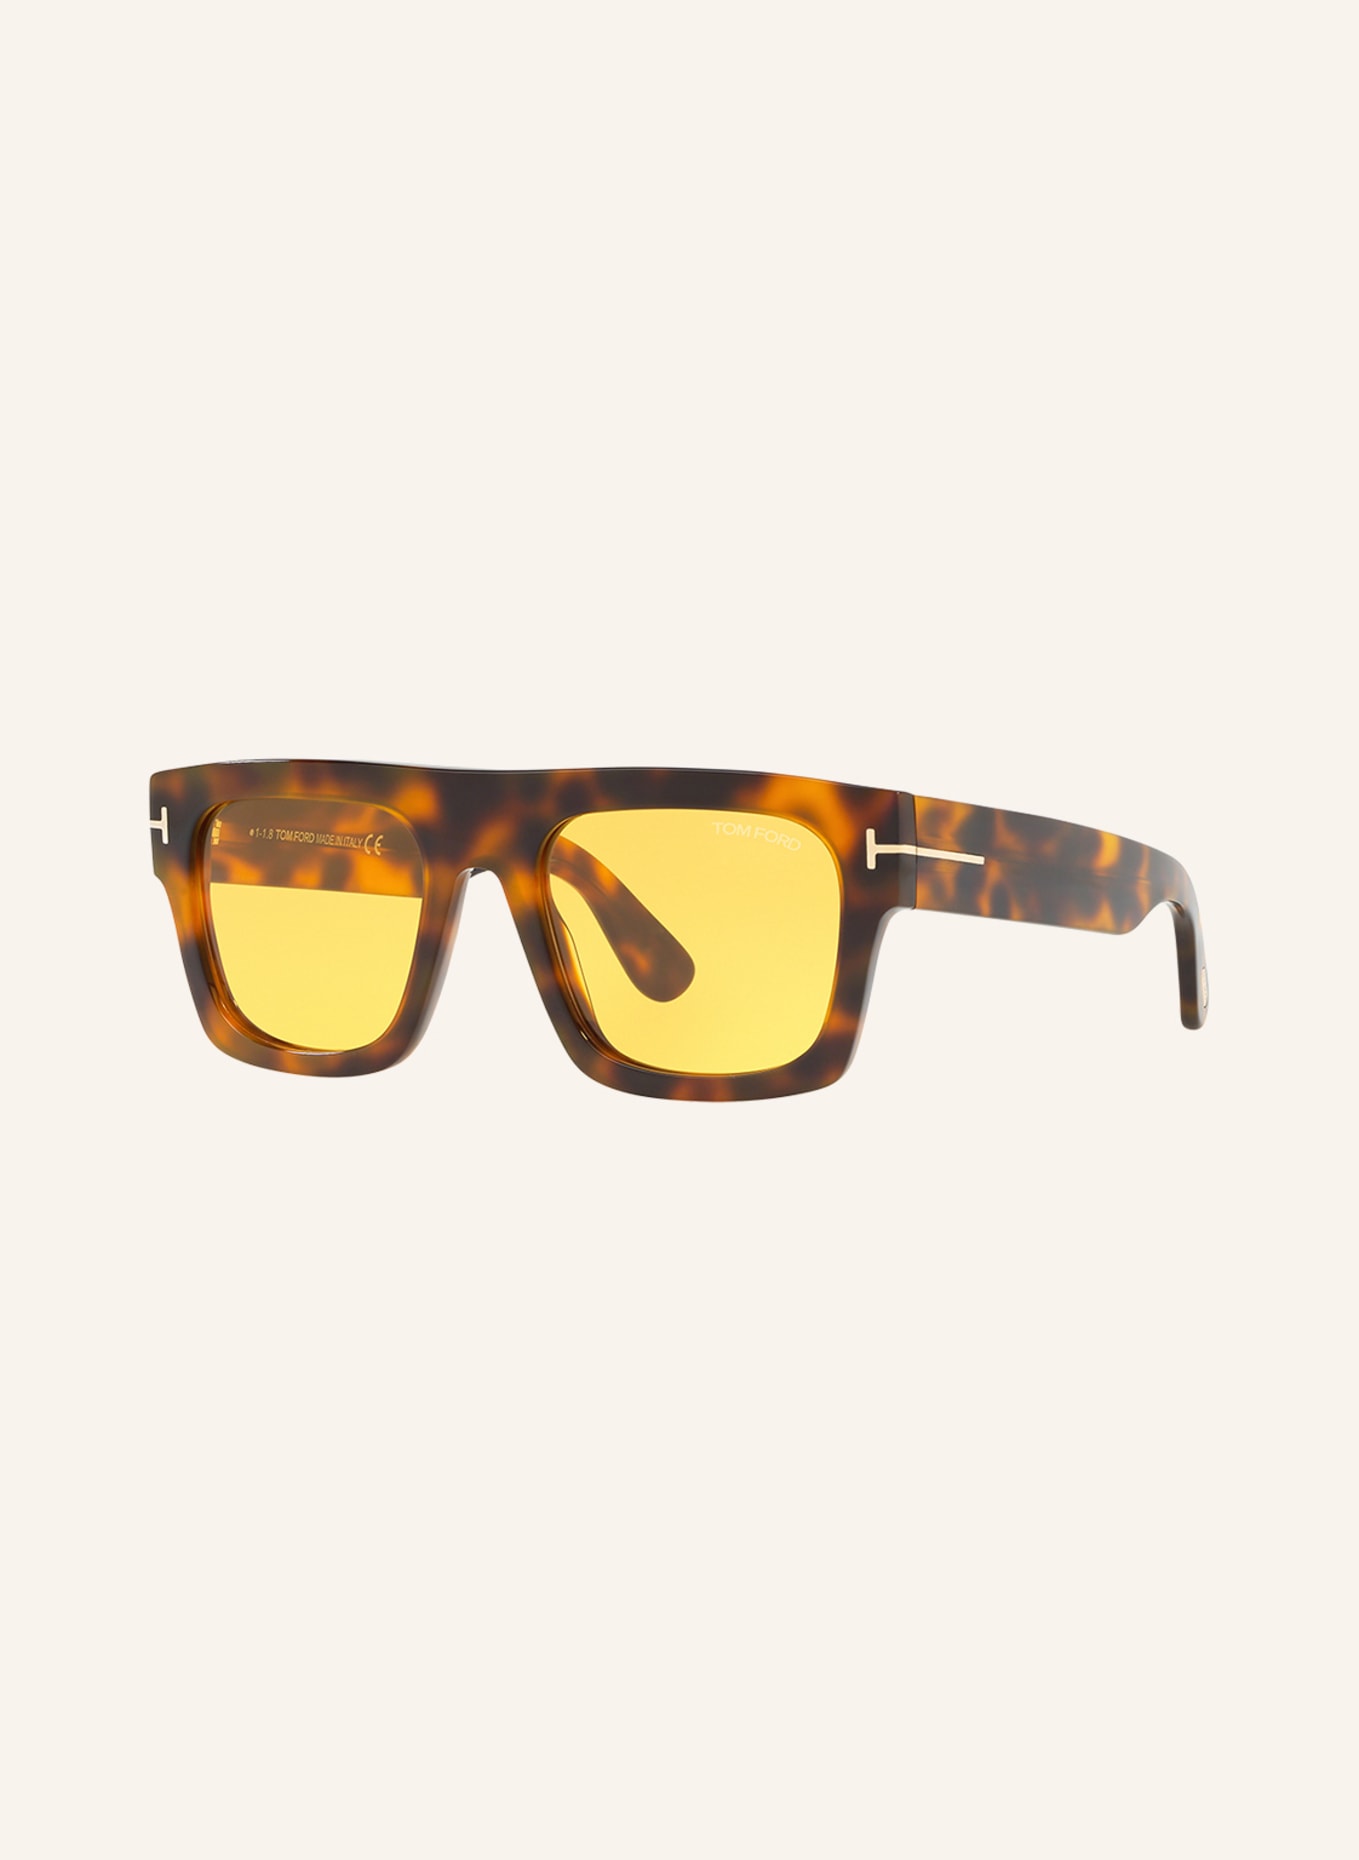 TOM FORD Sunglasses FT0711 FAUSTO, Color: 4402D1 - HAVANA/YELLOW (Image 1)